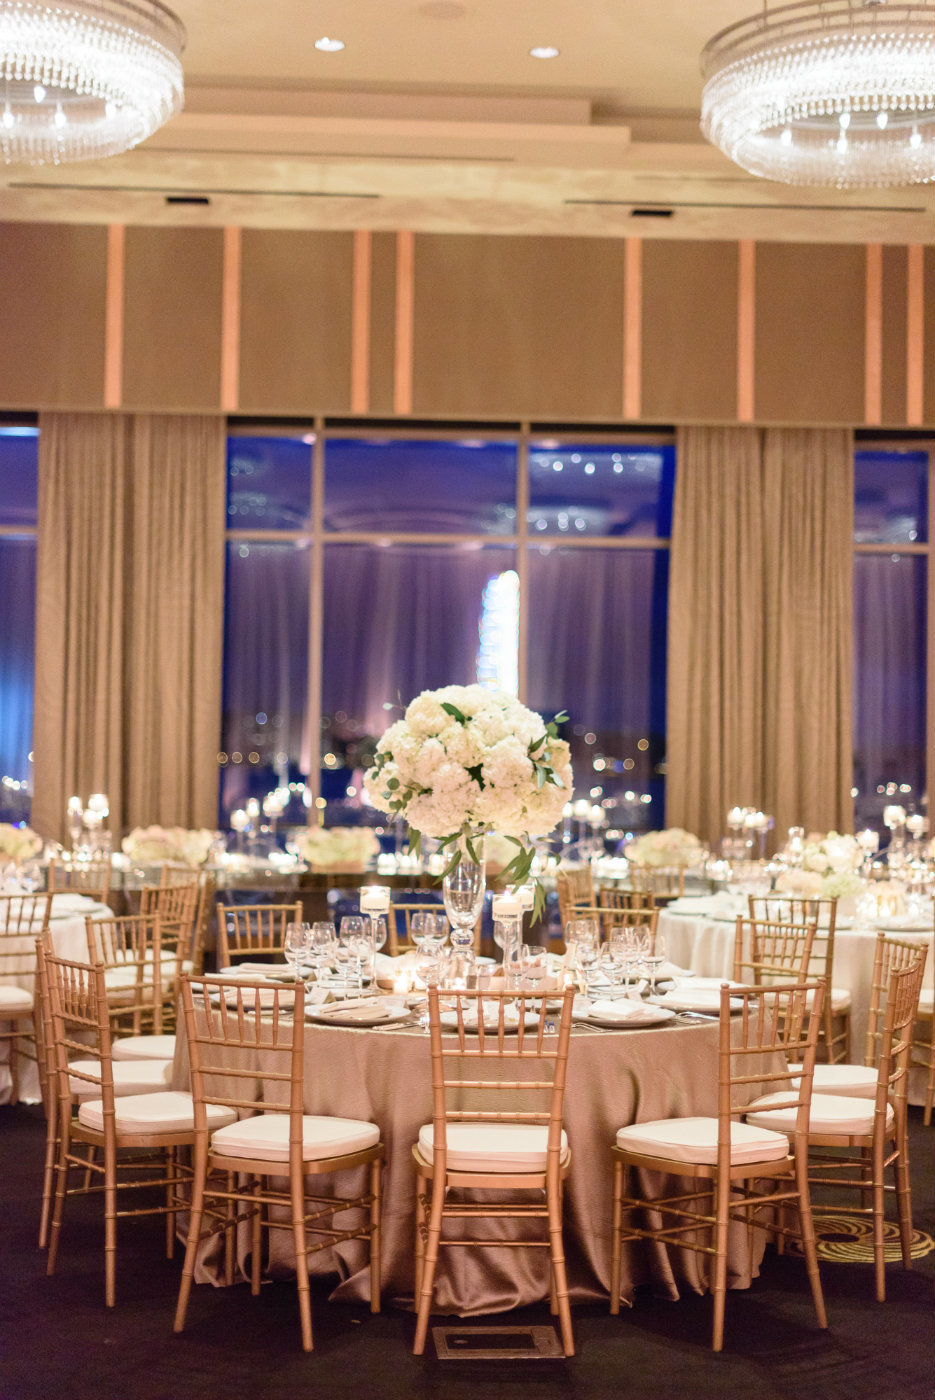 Tall white centerpiece with gold chiavari chairs are a classic look for a winter ballroom wedding.